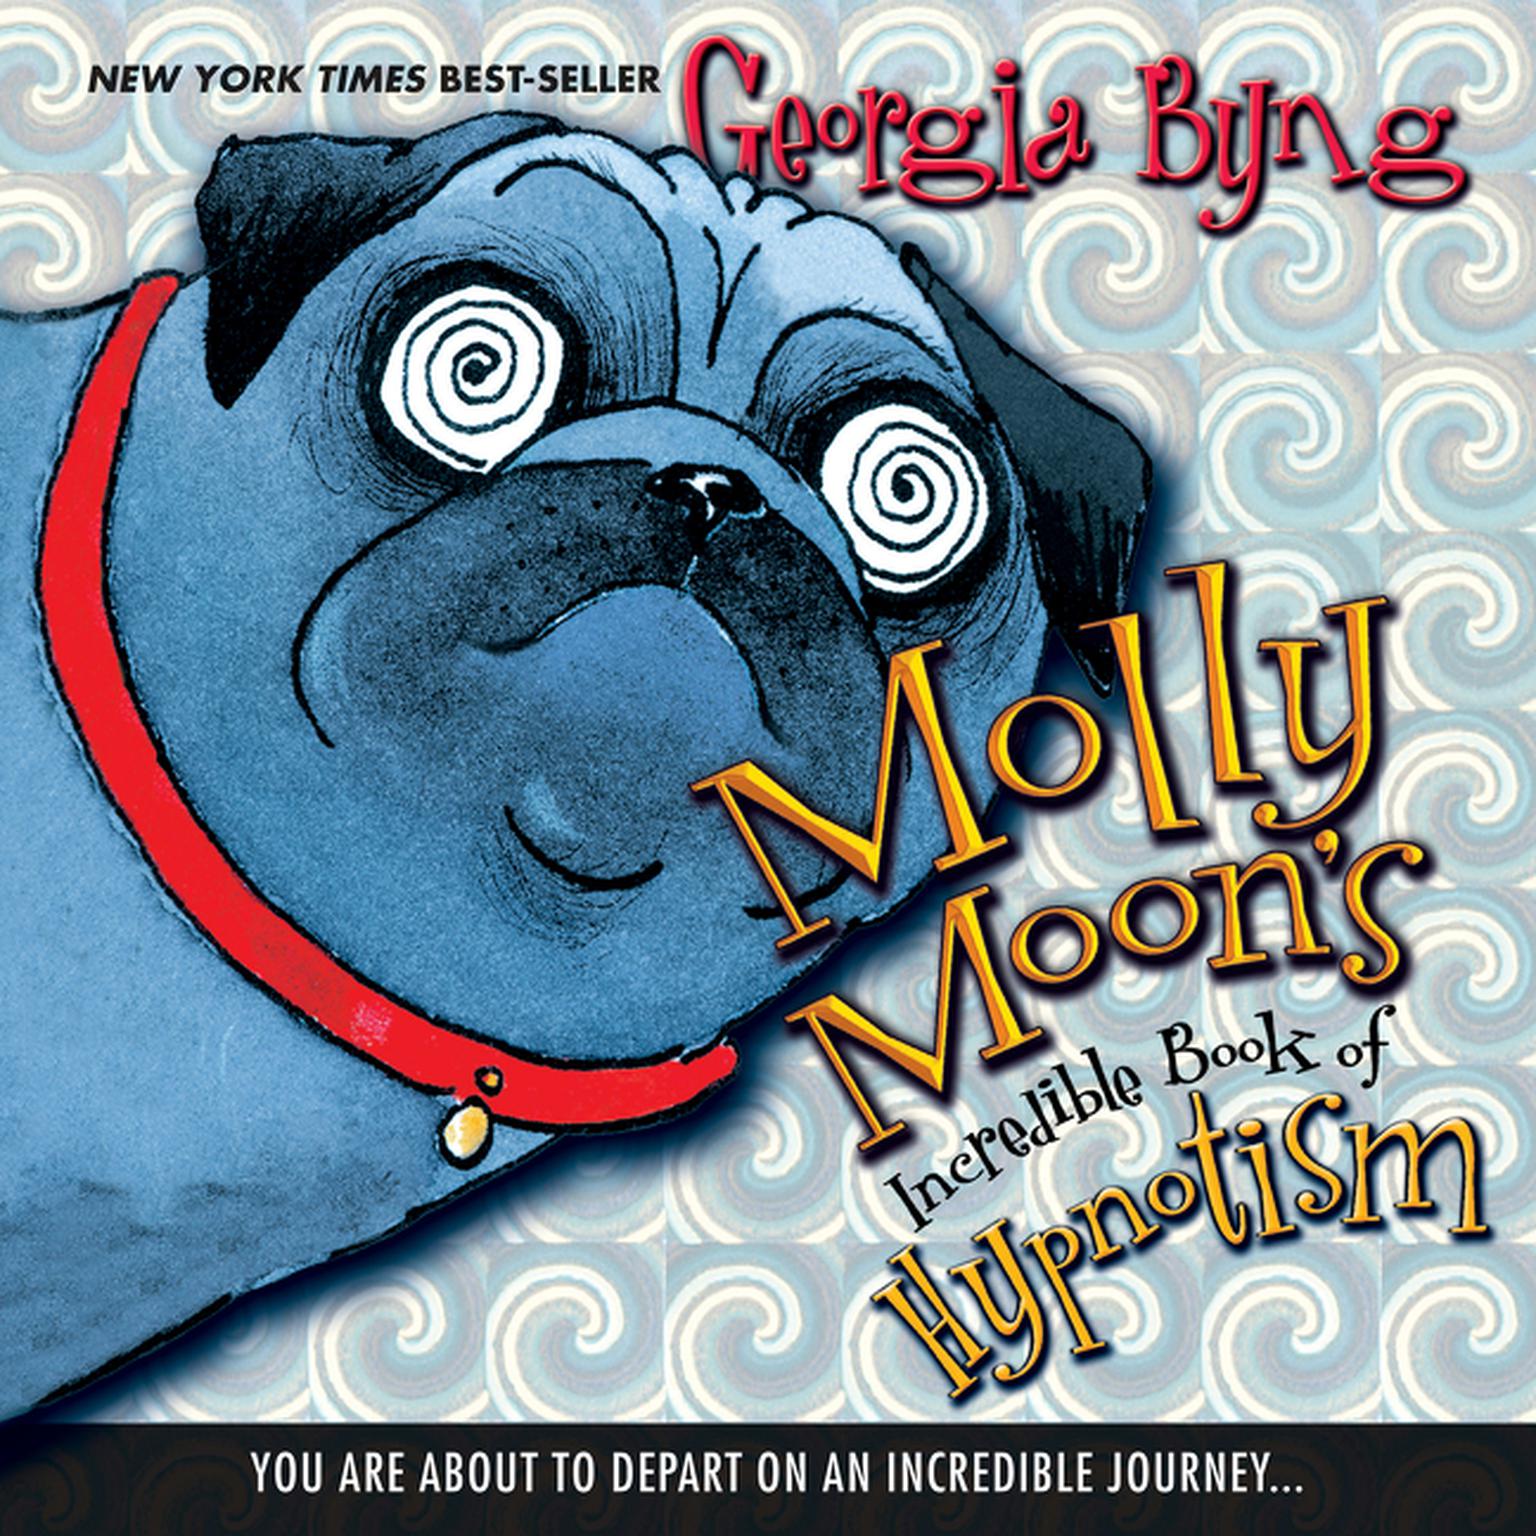 Molly Moons Incredible Book of Hypnotism (Abridged) Audiobook, by Georgia Byng